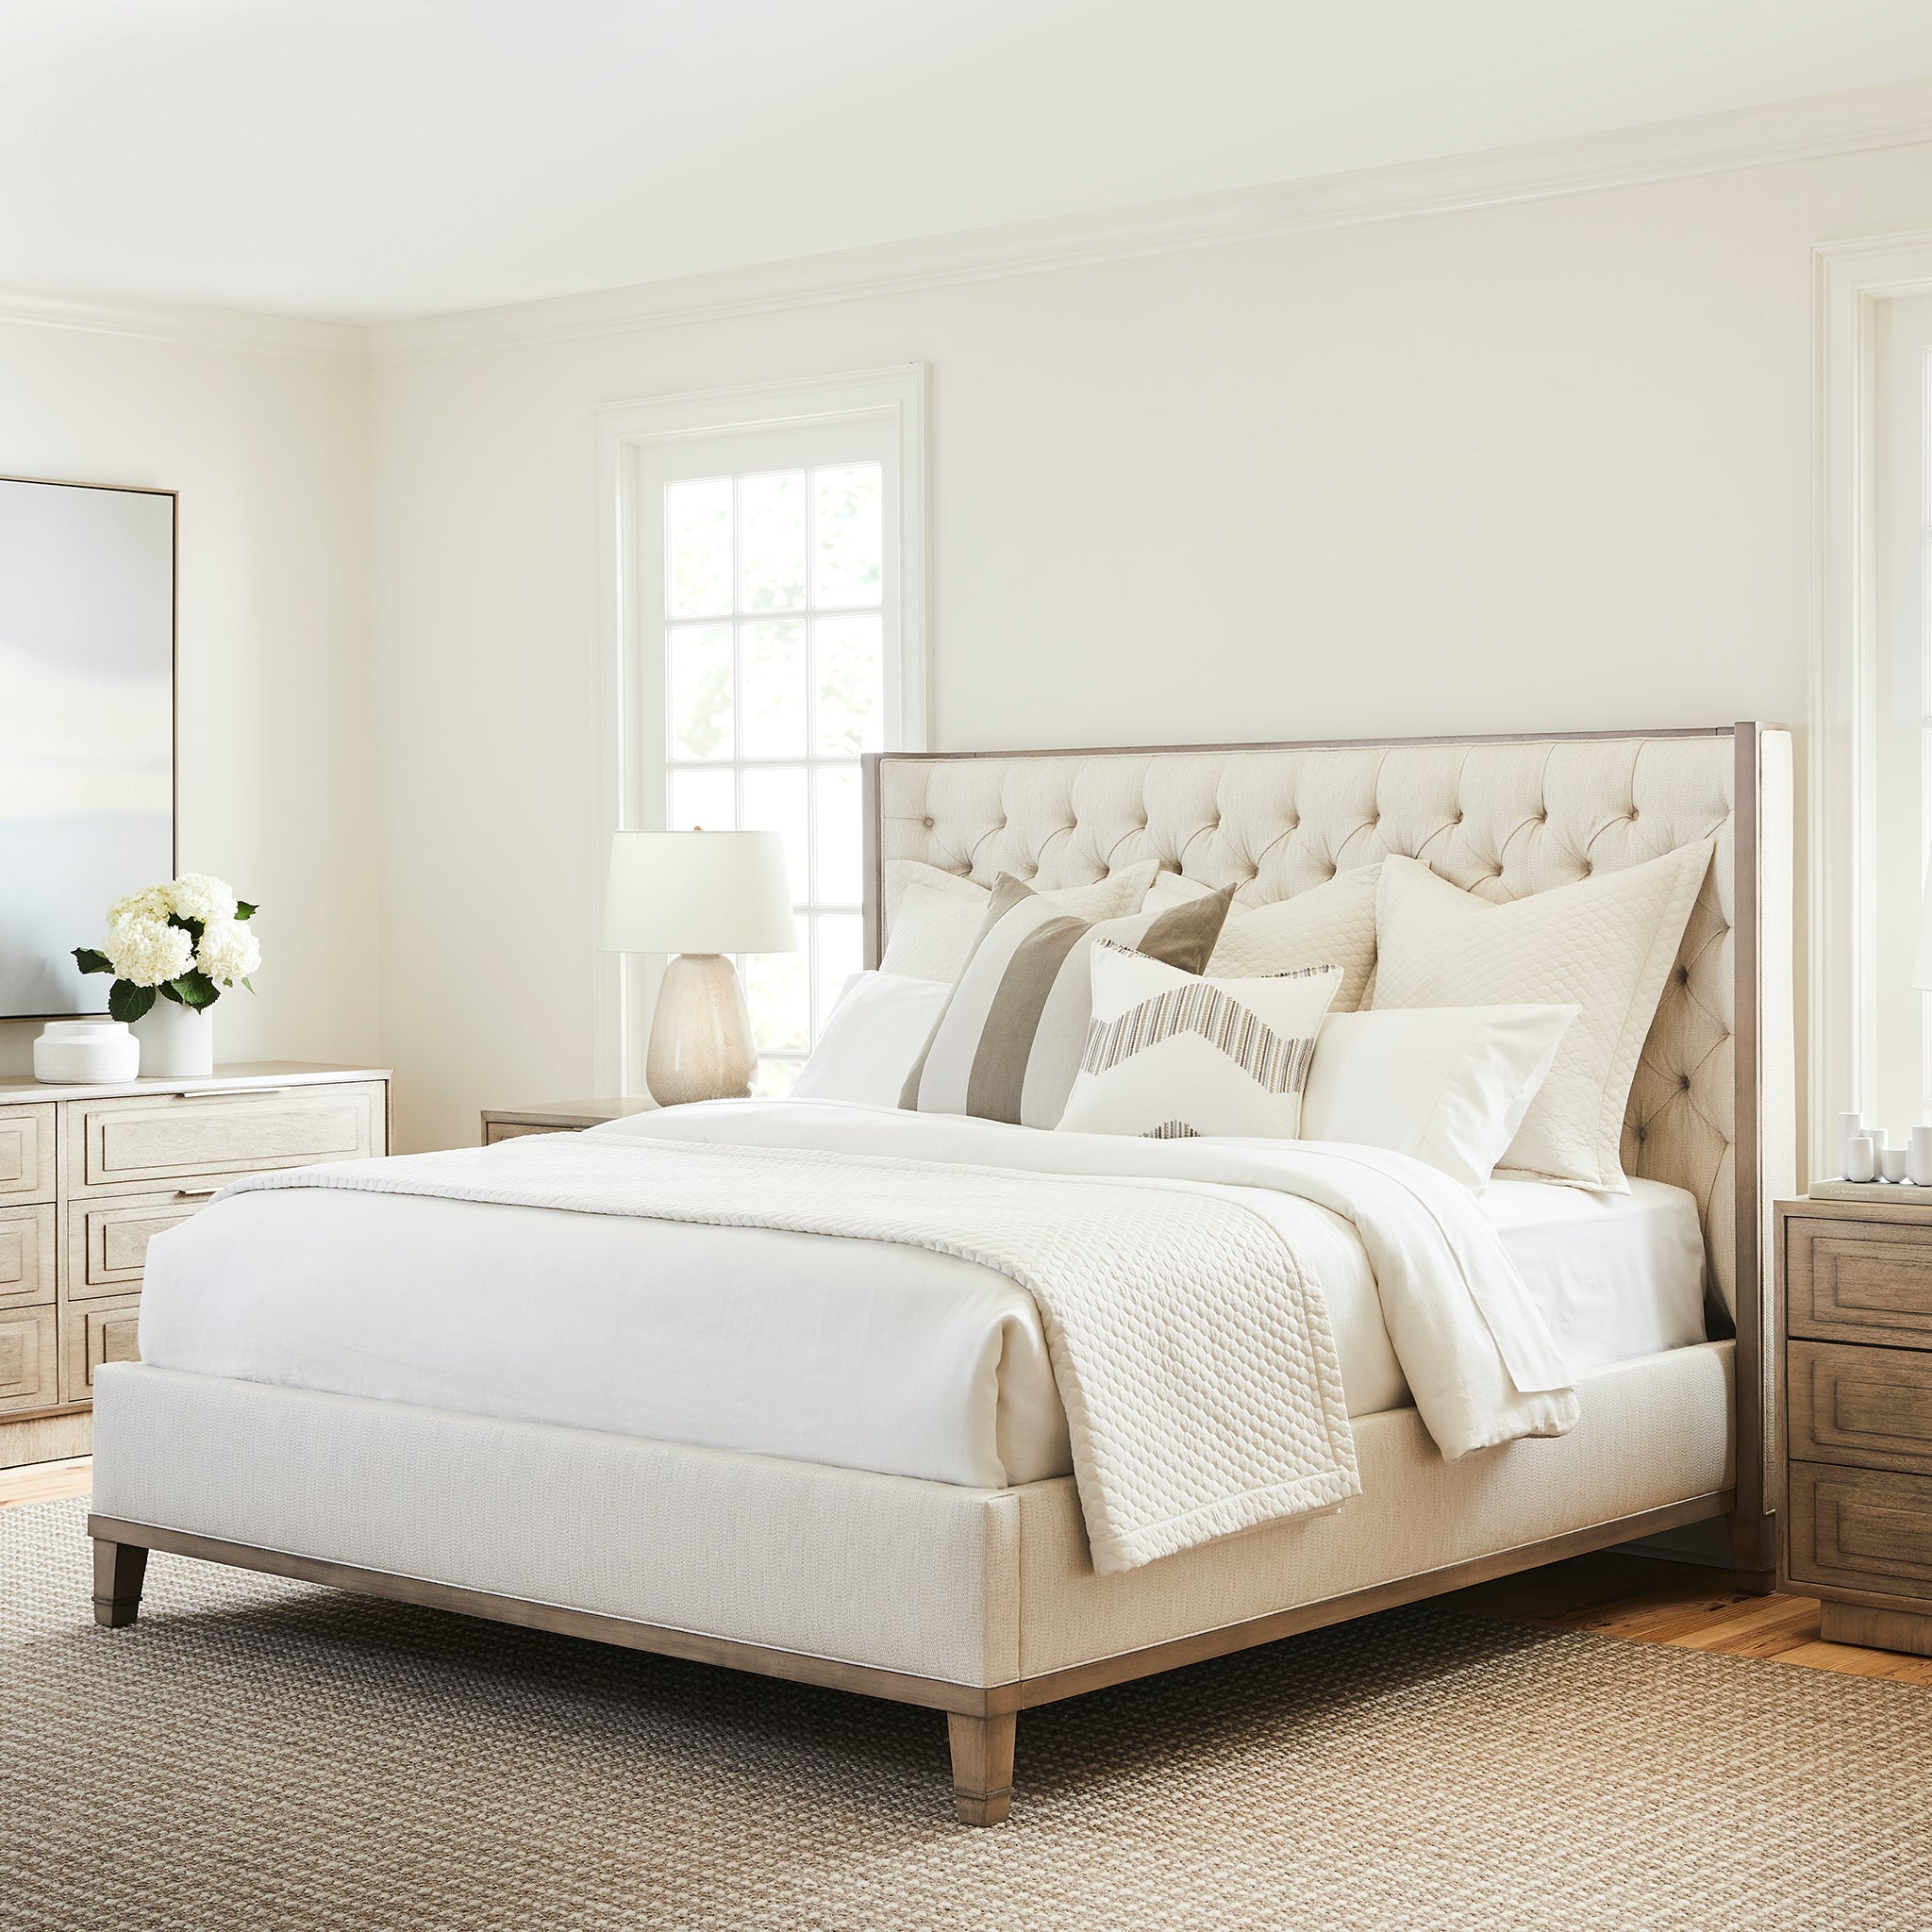 vanguard bowers king bed beds 